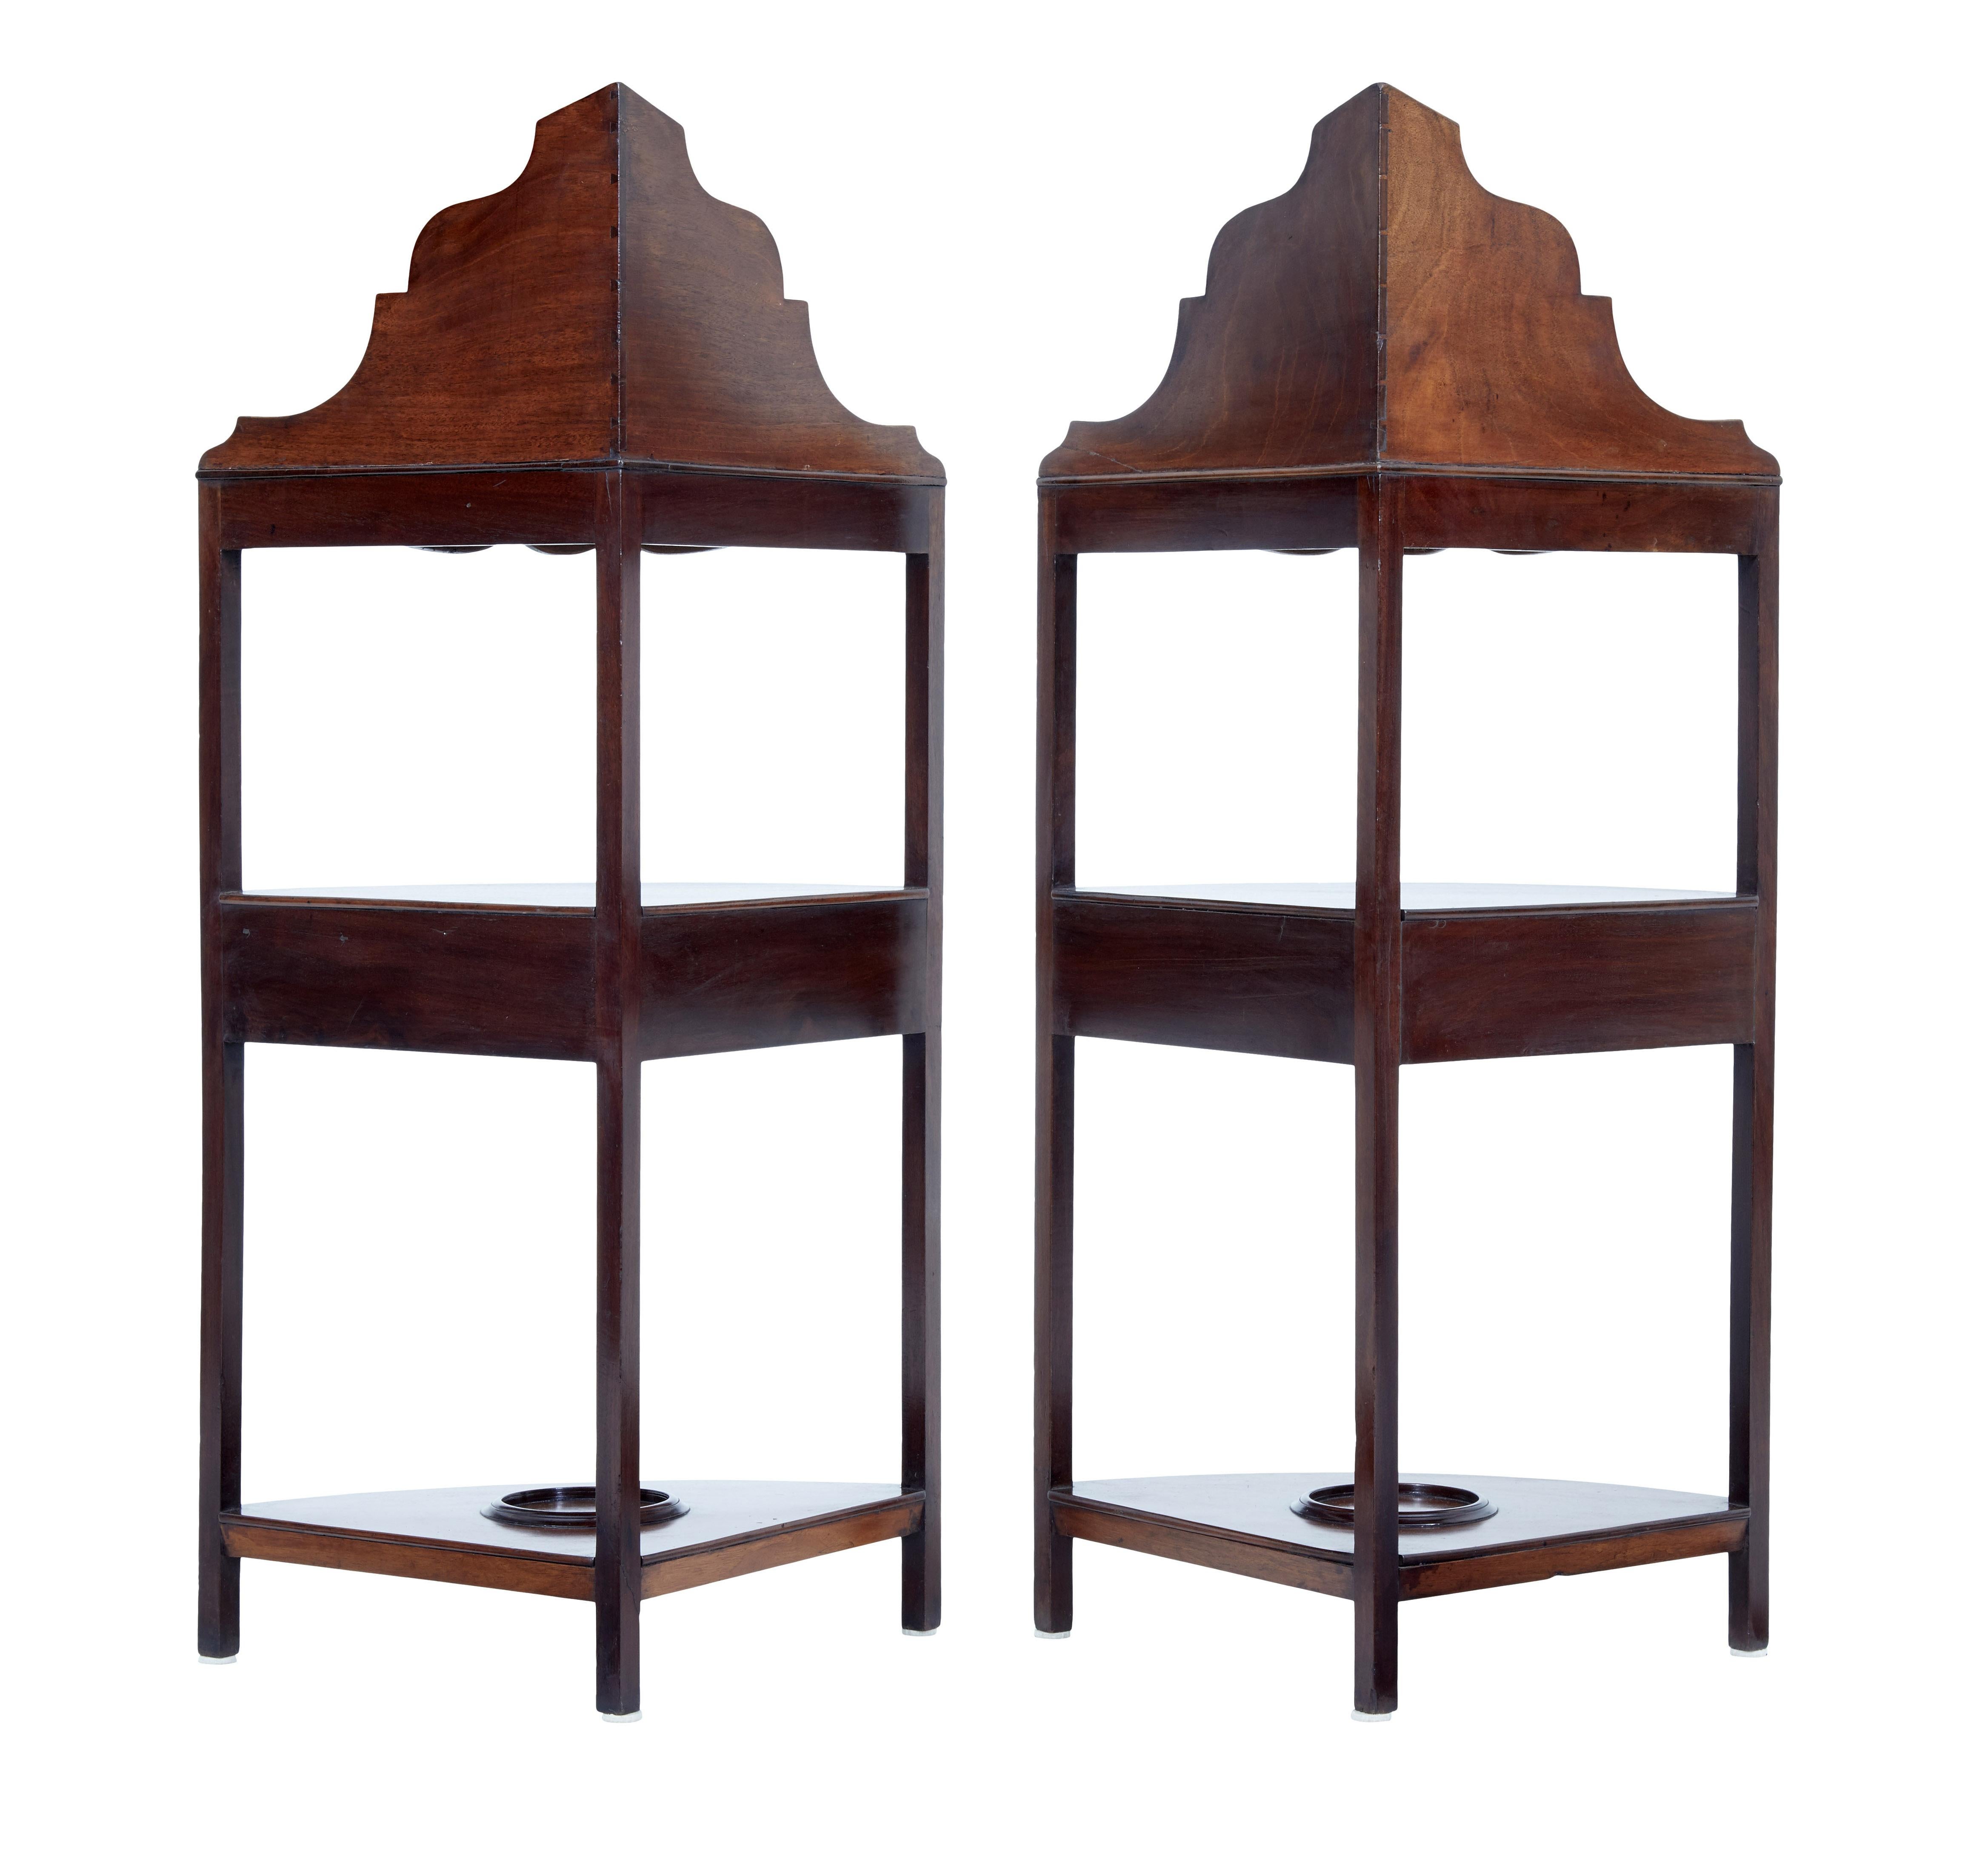 Hand-Crafted Pair of 19th Century Georgian Influenced Mahogany Washstands